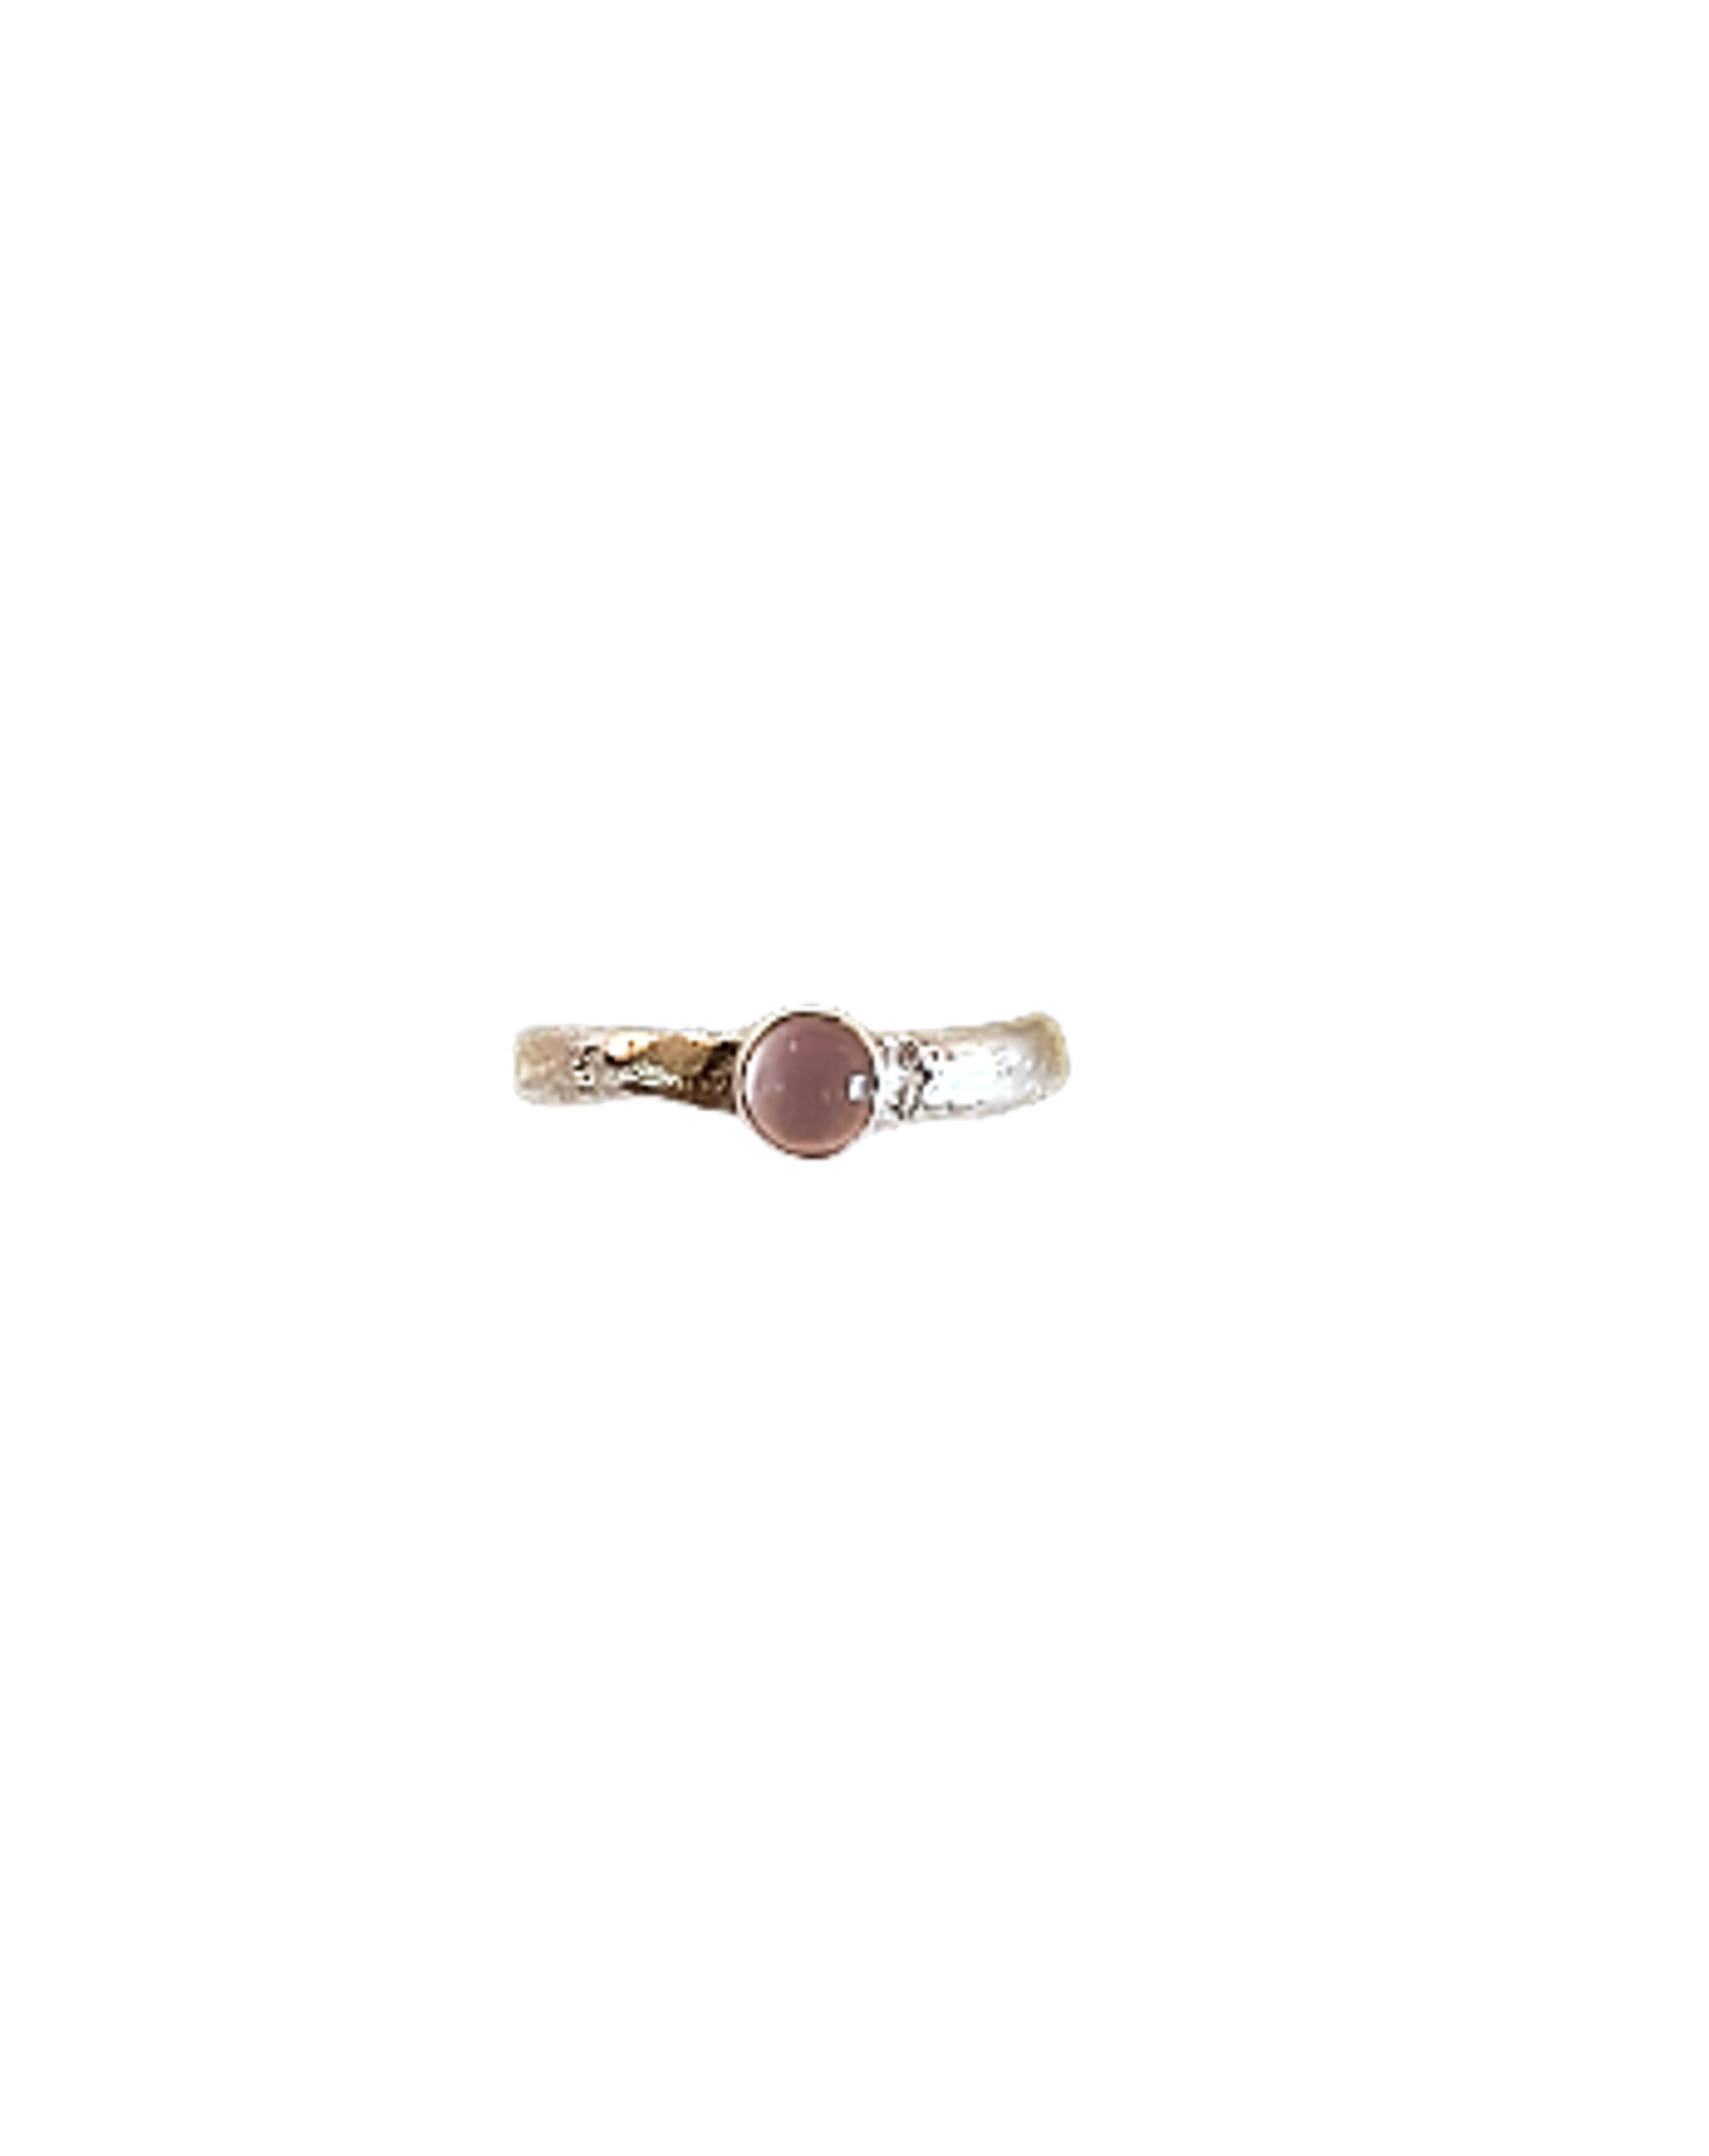 Bubbling Brook Ring - Pink Chalcedony by Kristen Baird